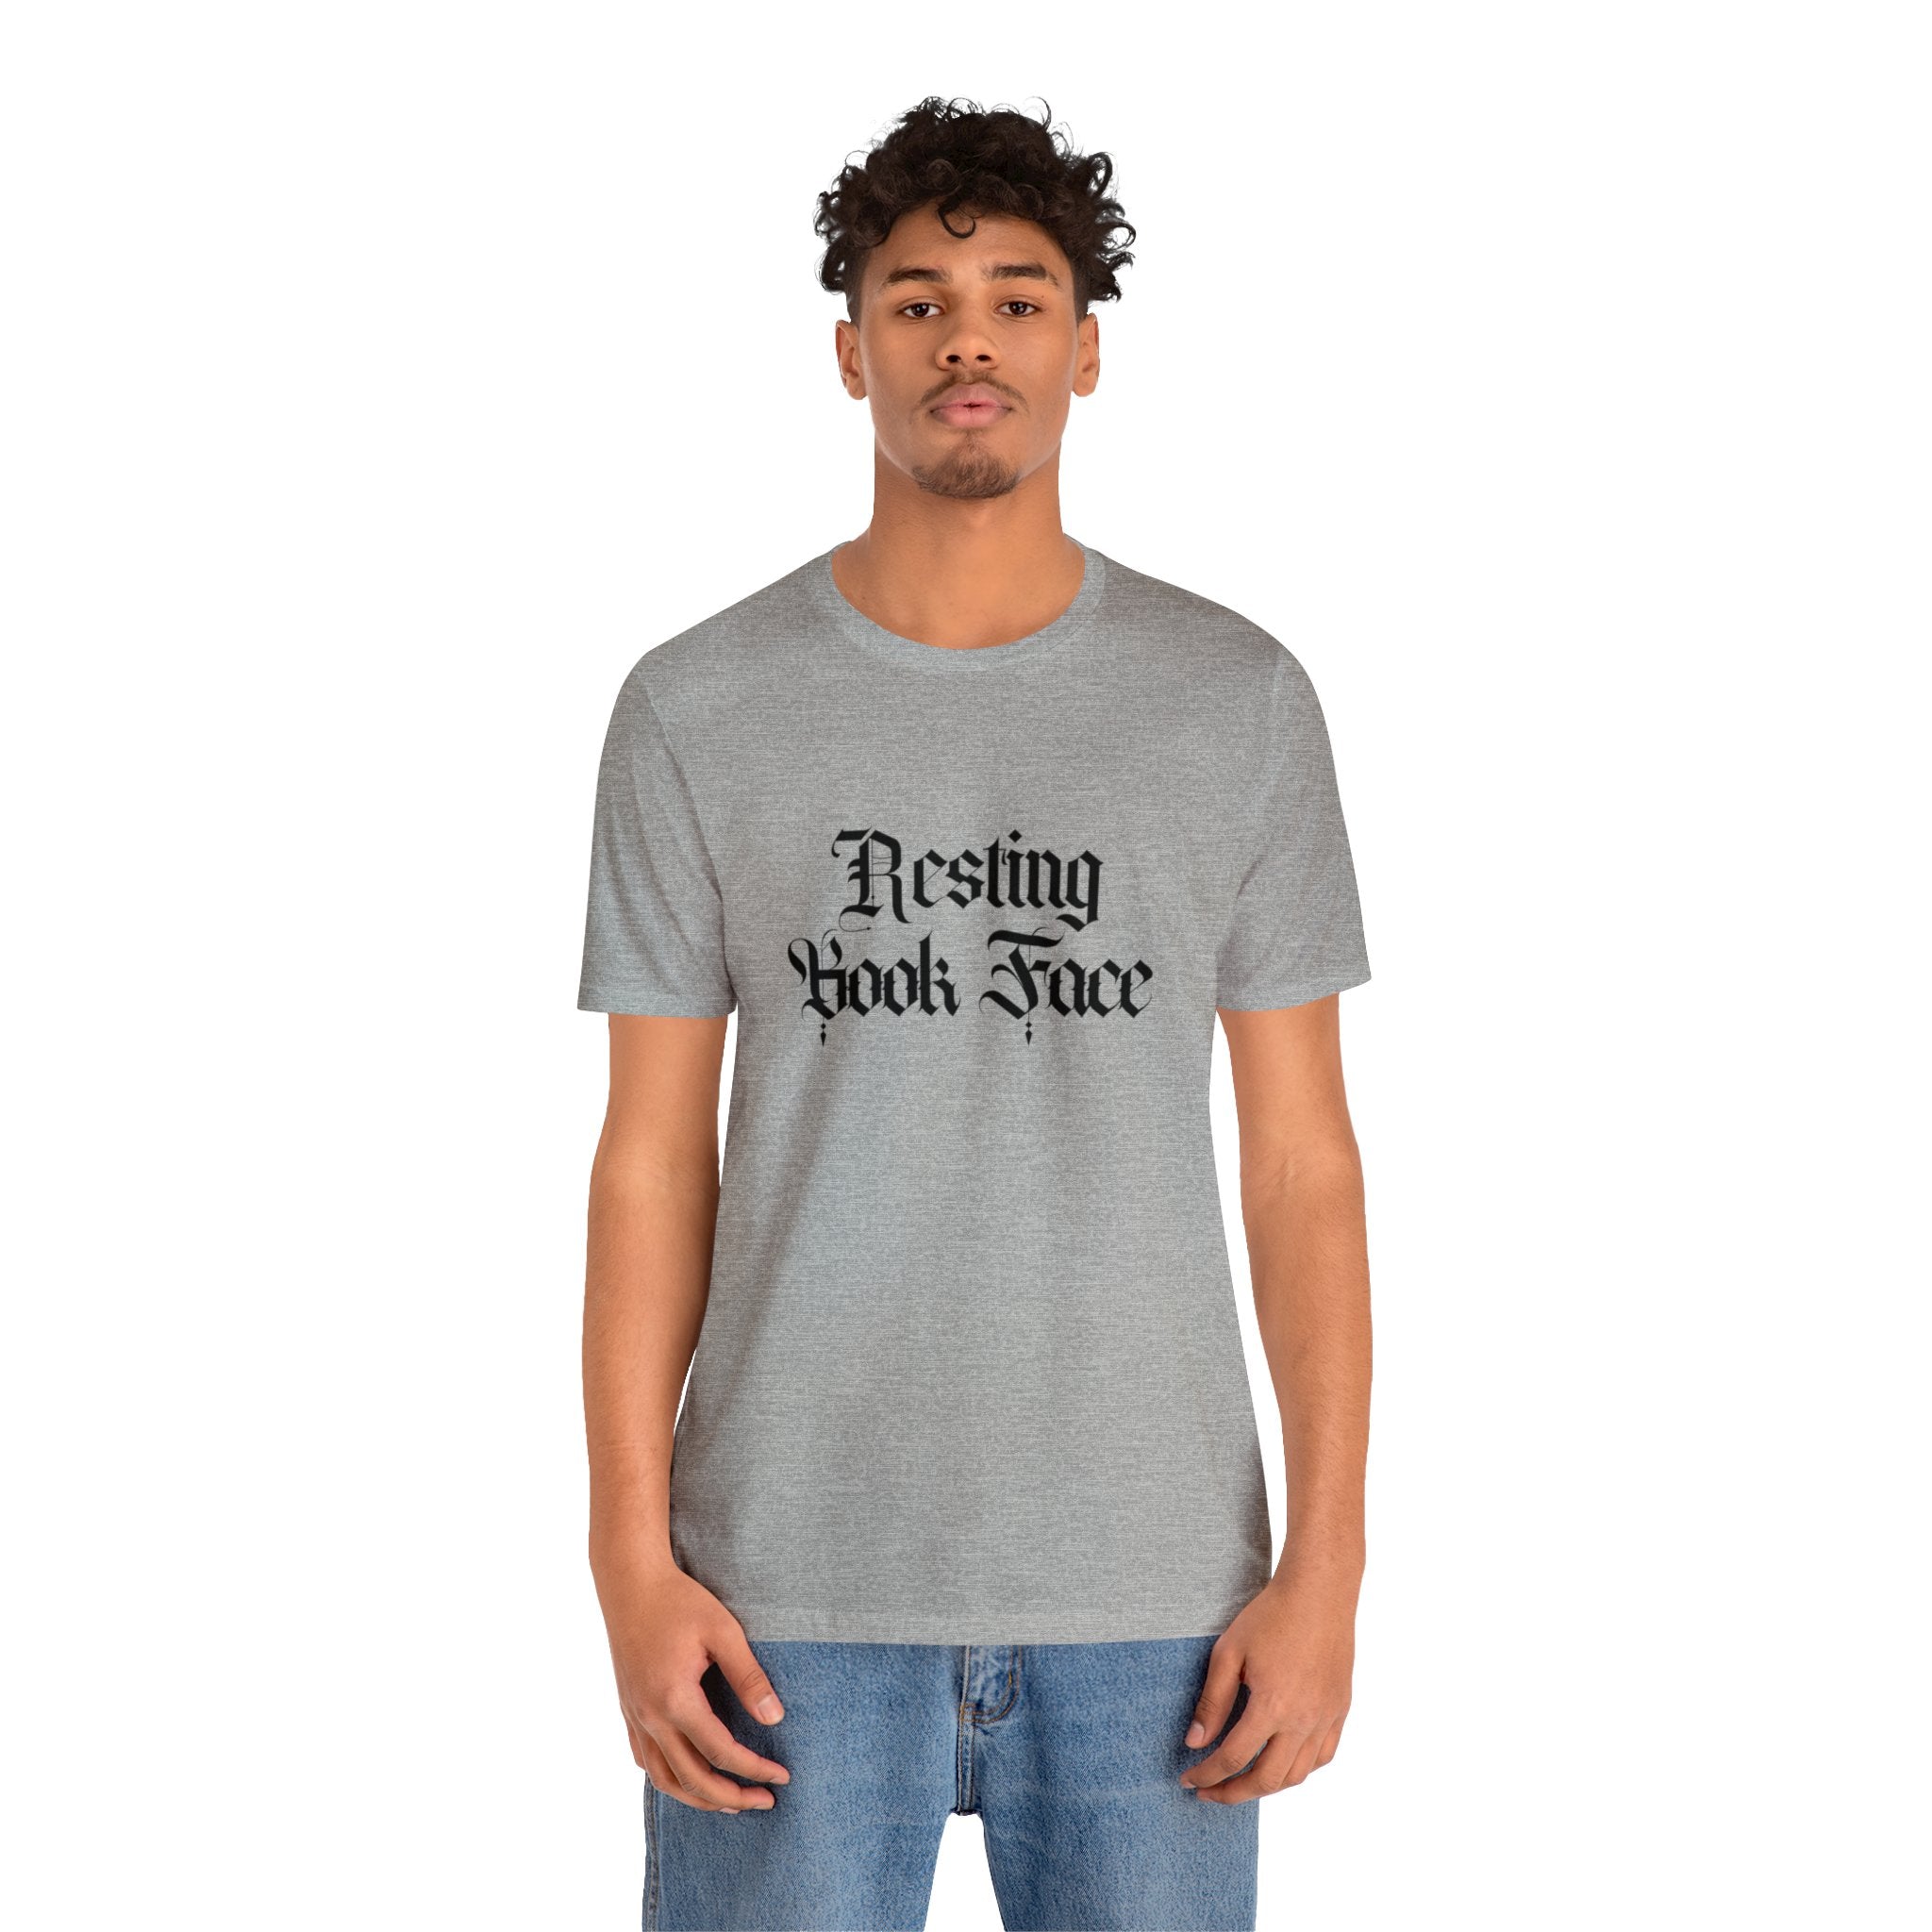 Resting Book Face Tee